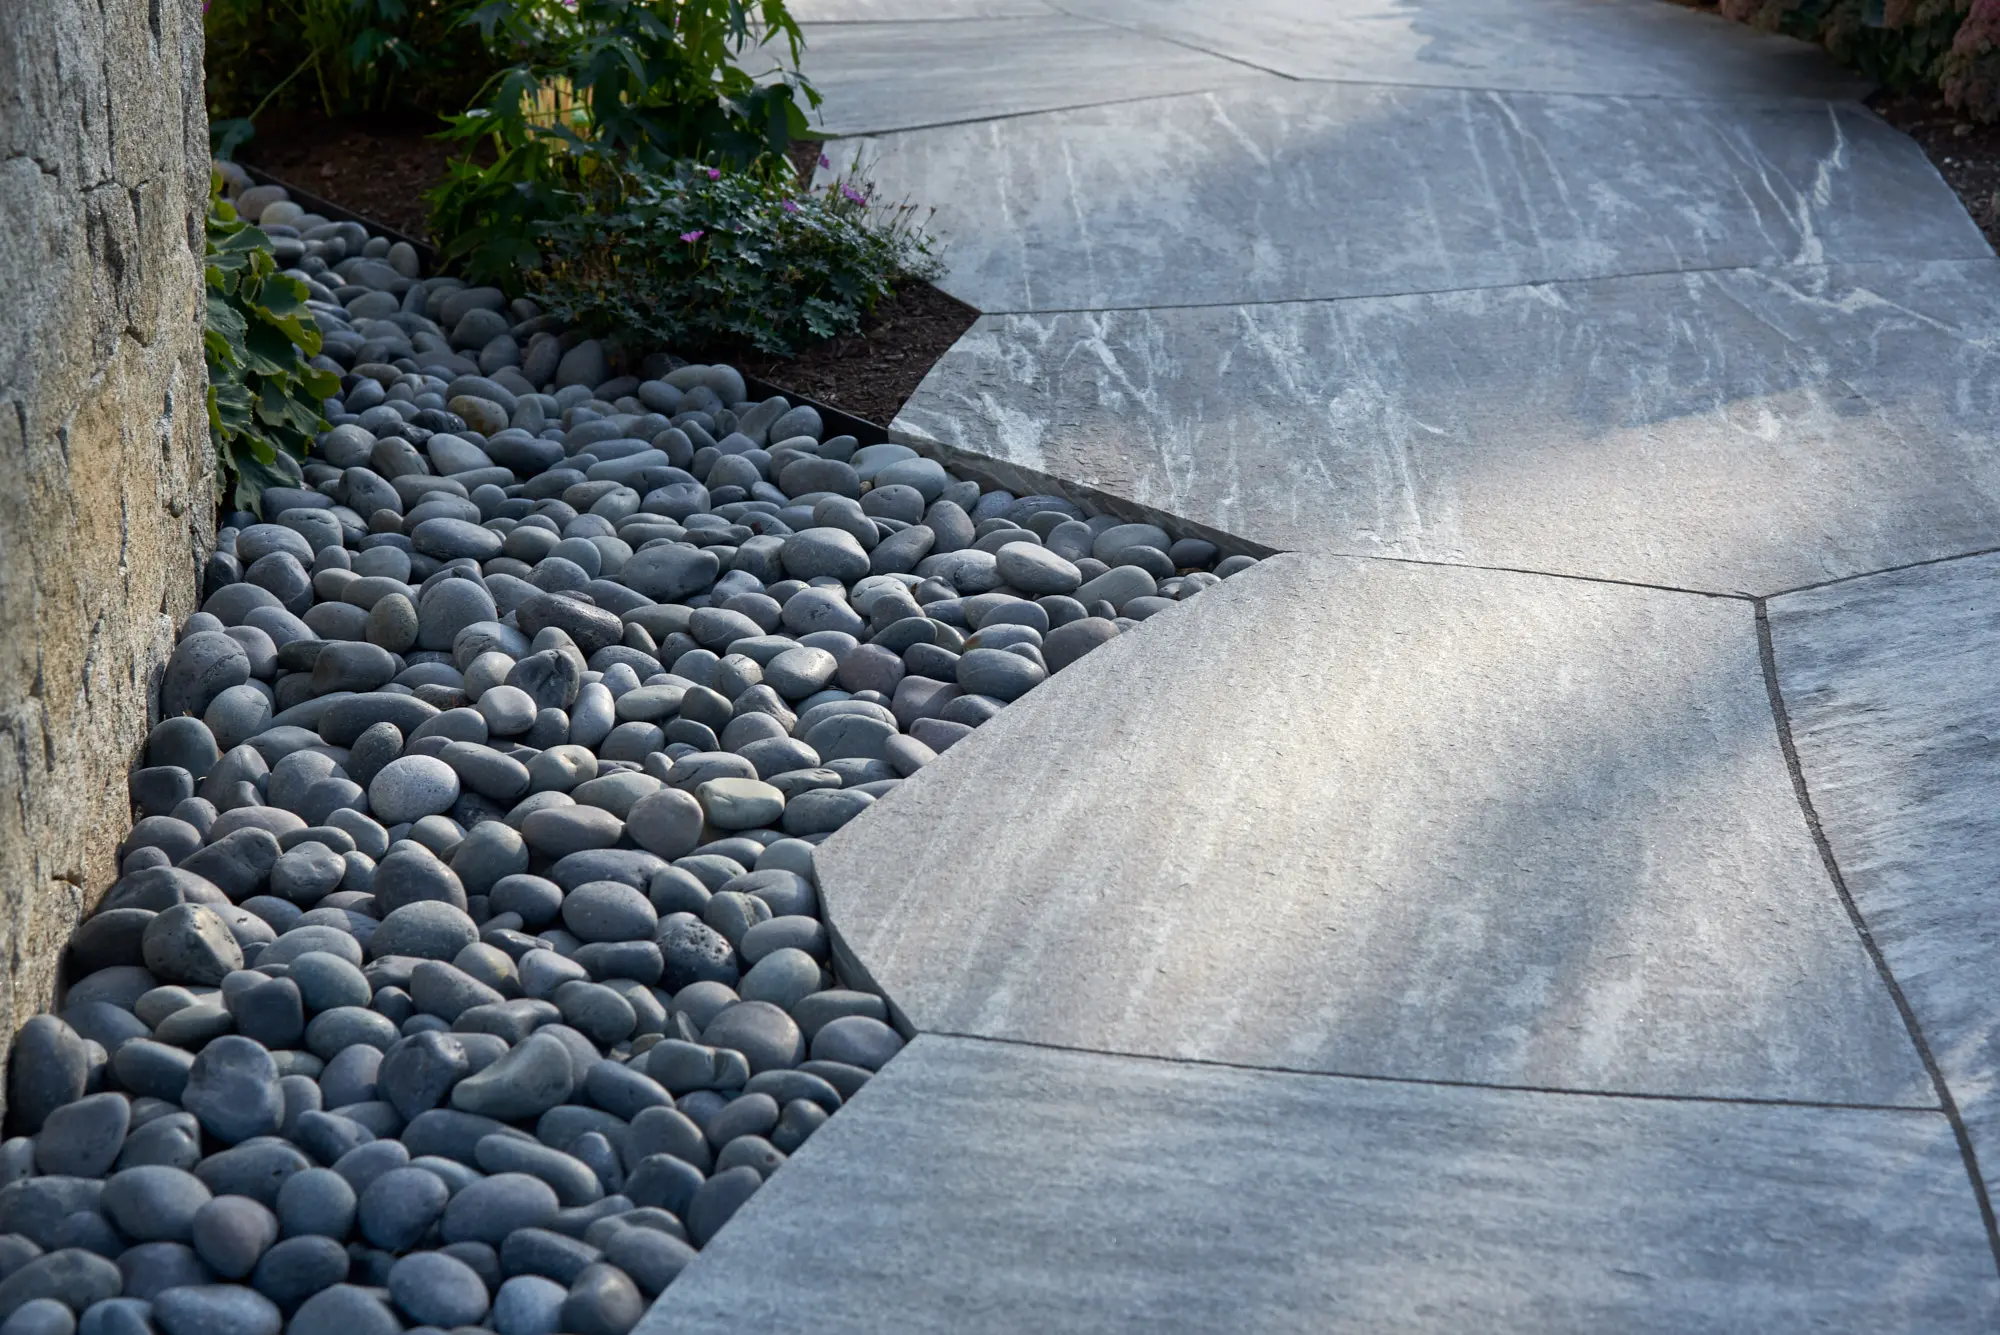 Stonework adds a peaceful atmosphere along the walkway